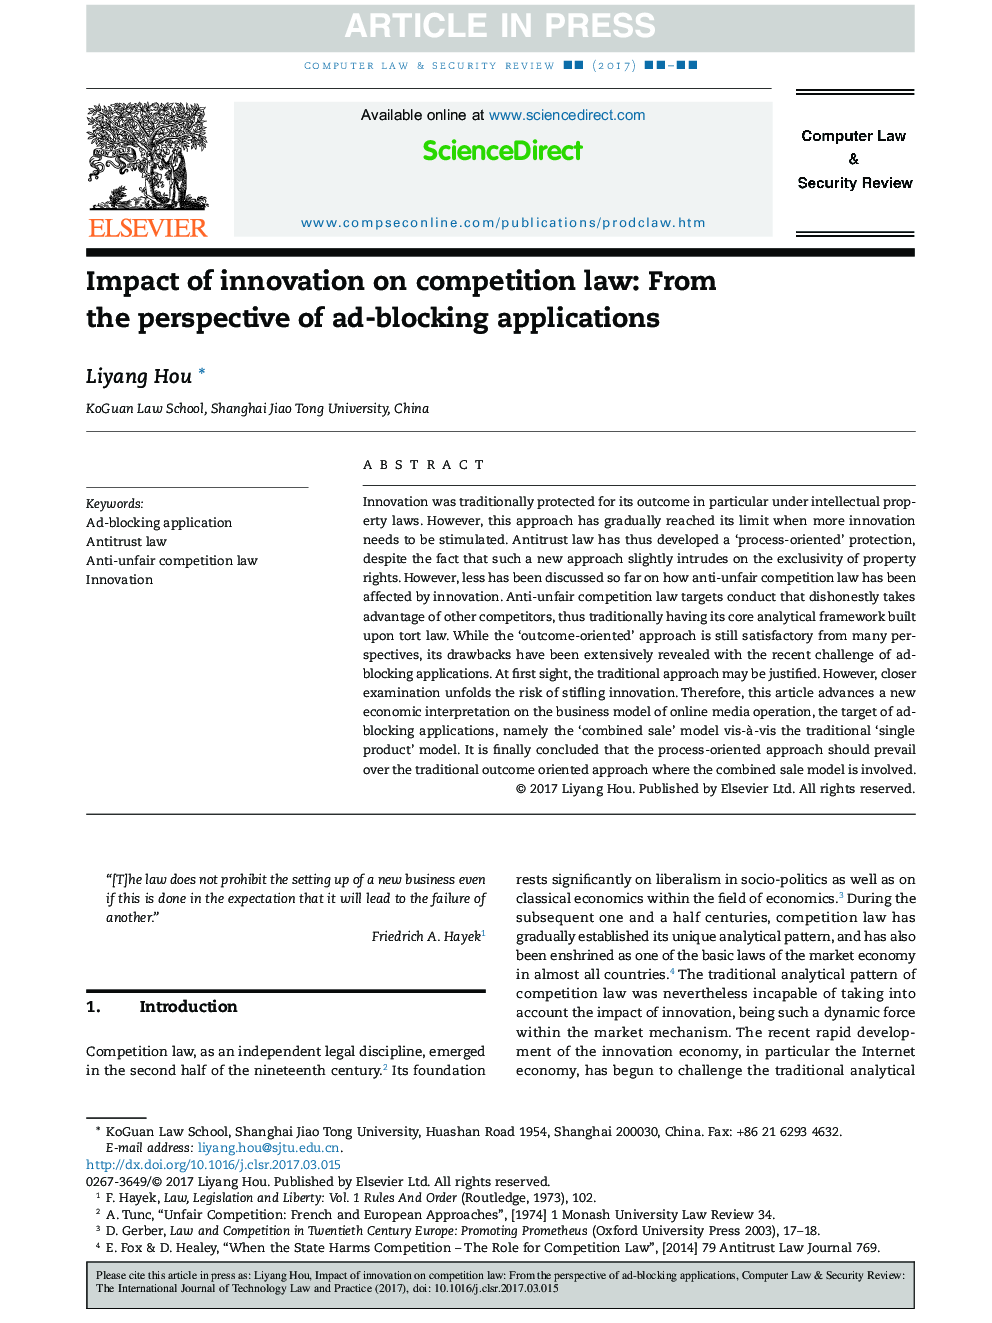 Impact of innovation on competition law: From the perspective of ad-blocking applications